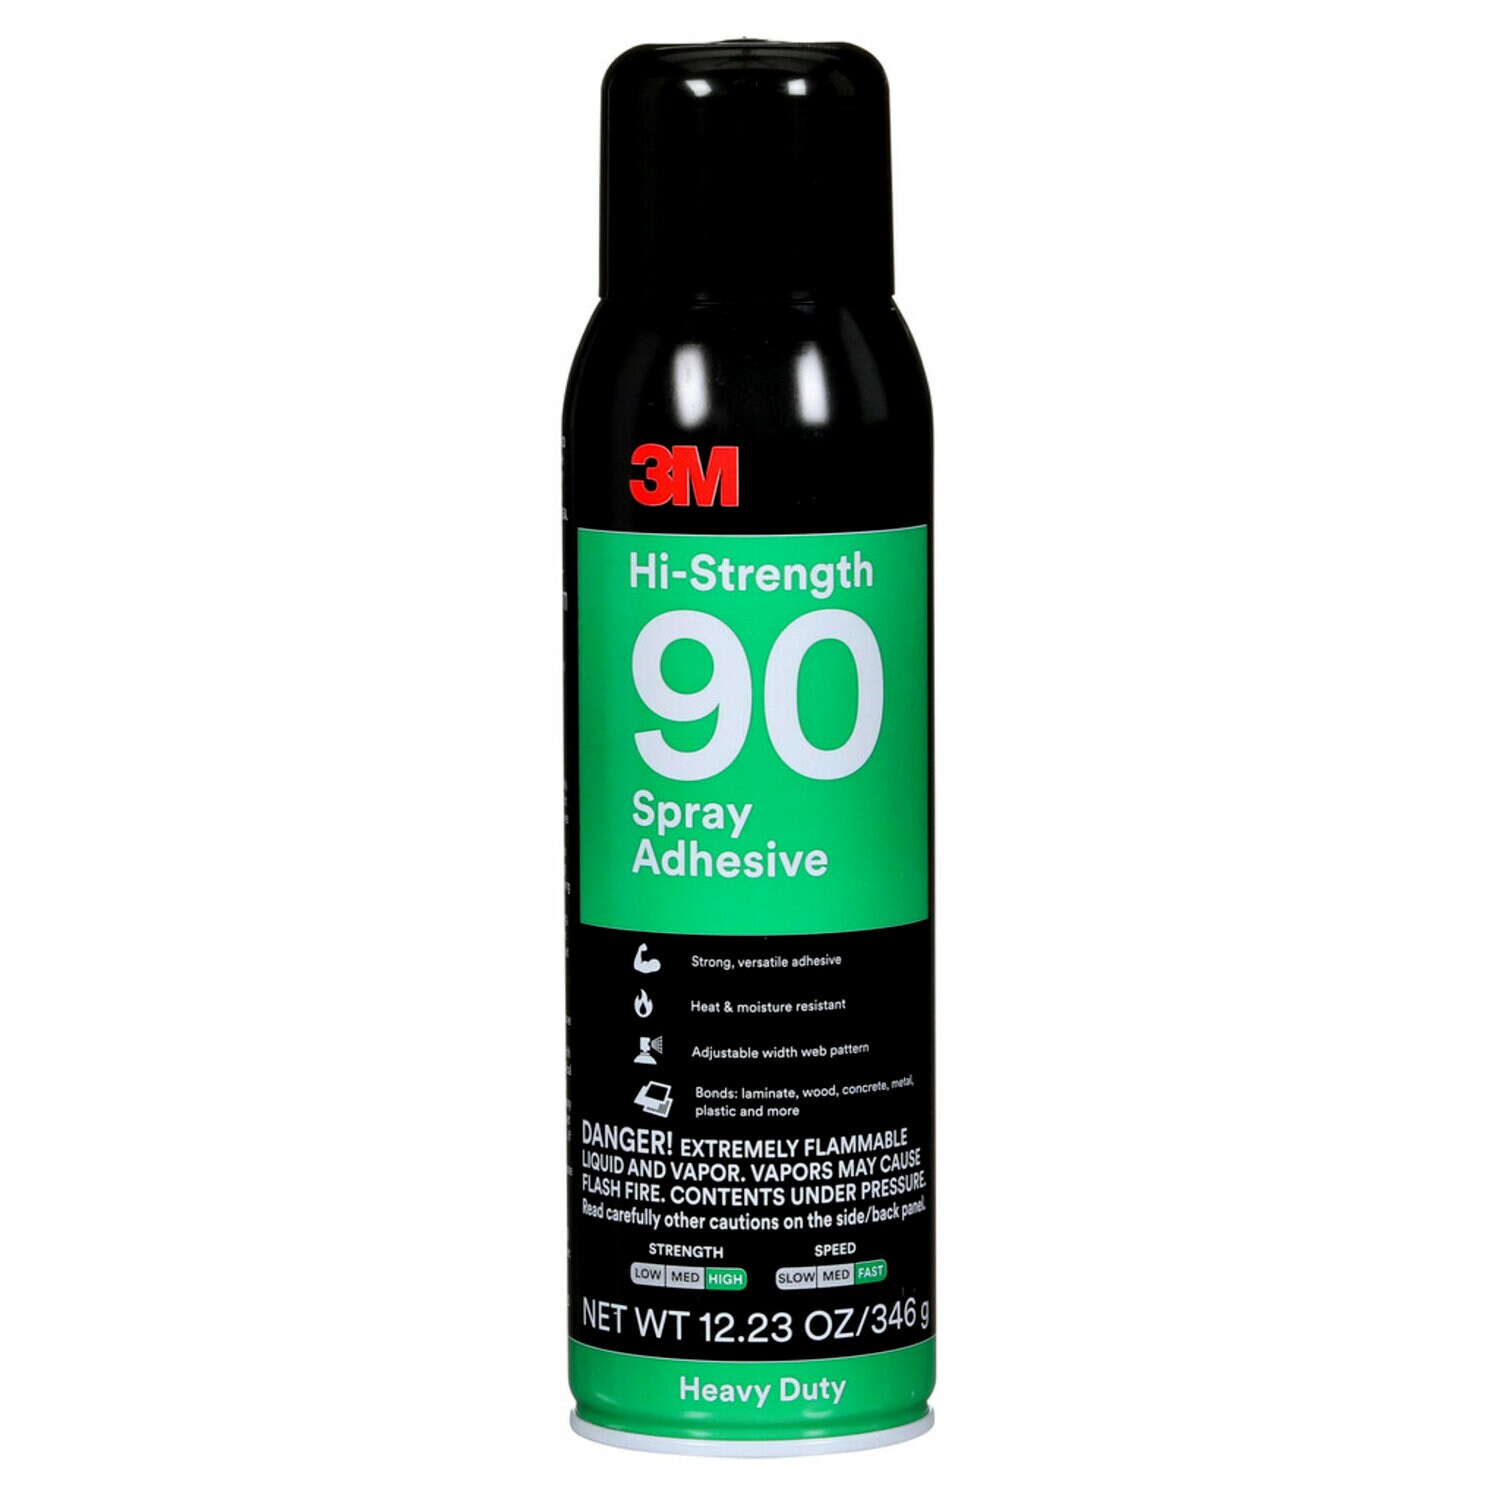 7010366483 - 3M Hi-Strength Spray Adhesive 90, Clear, 16 fl oz Can (Net Wt 12.23oz), 12/Case, NOT FOR SALE IN CA AND OTHER STATES